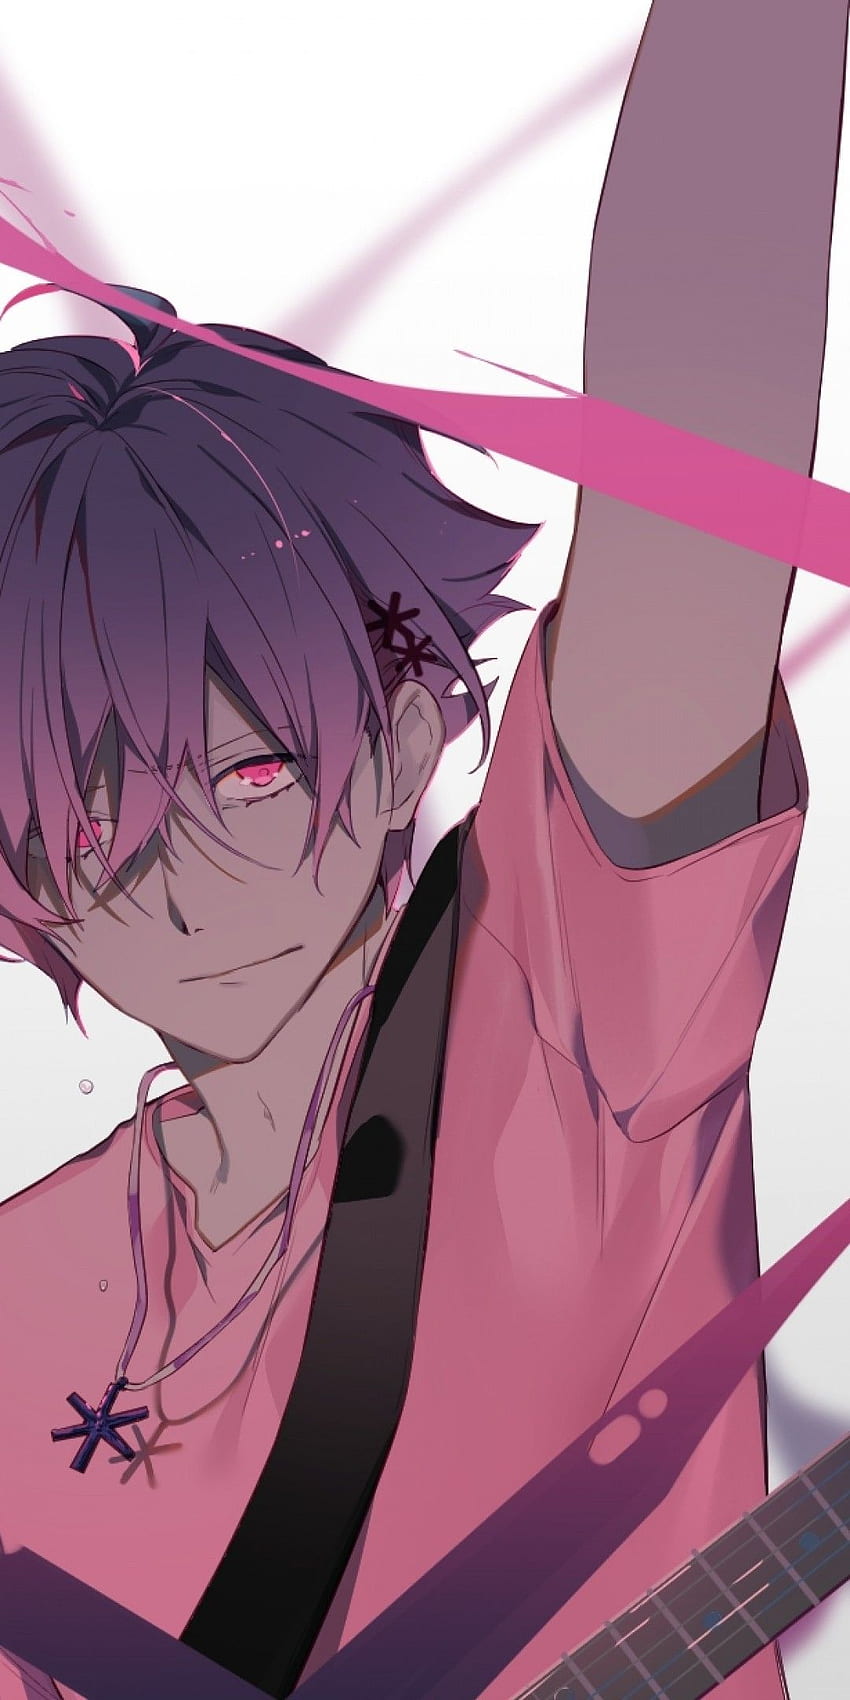 Top 8 Charismatic Male Anime Characters with Pink Hair